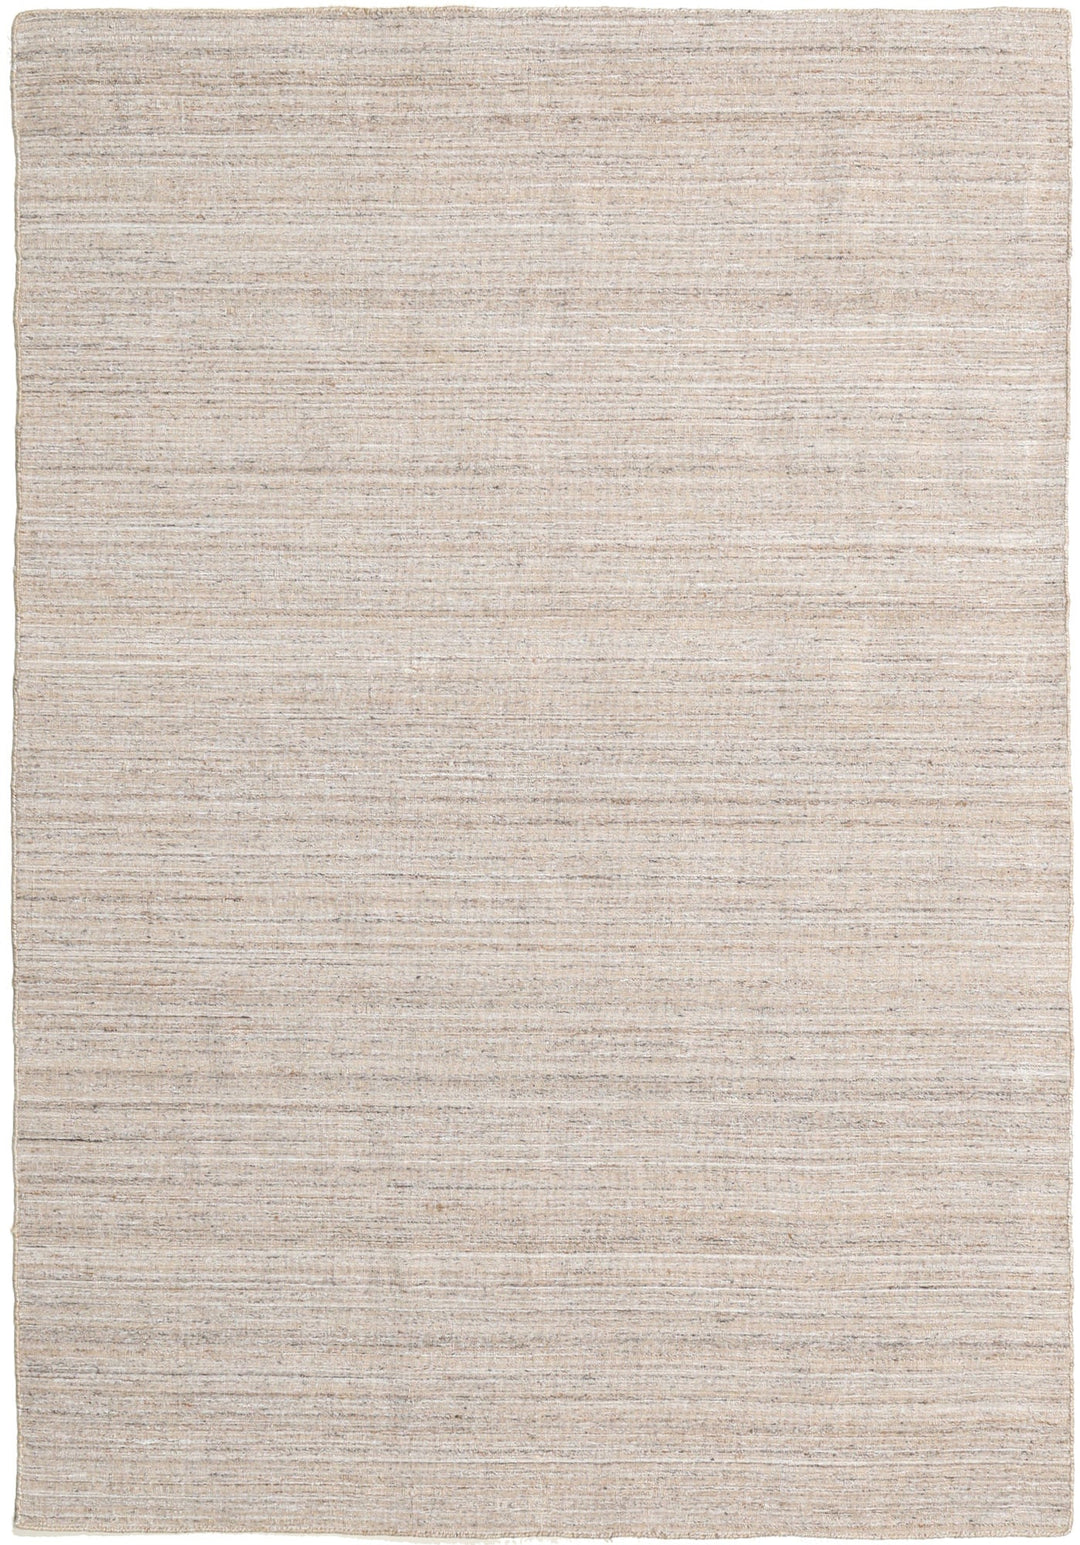 Mix Recycled Bottle Area Rug Petra - Mix Recycled Bottle Area Rug Rug Vista 160 x 230 cm Beige Mix 